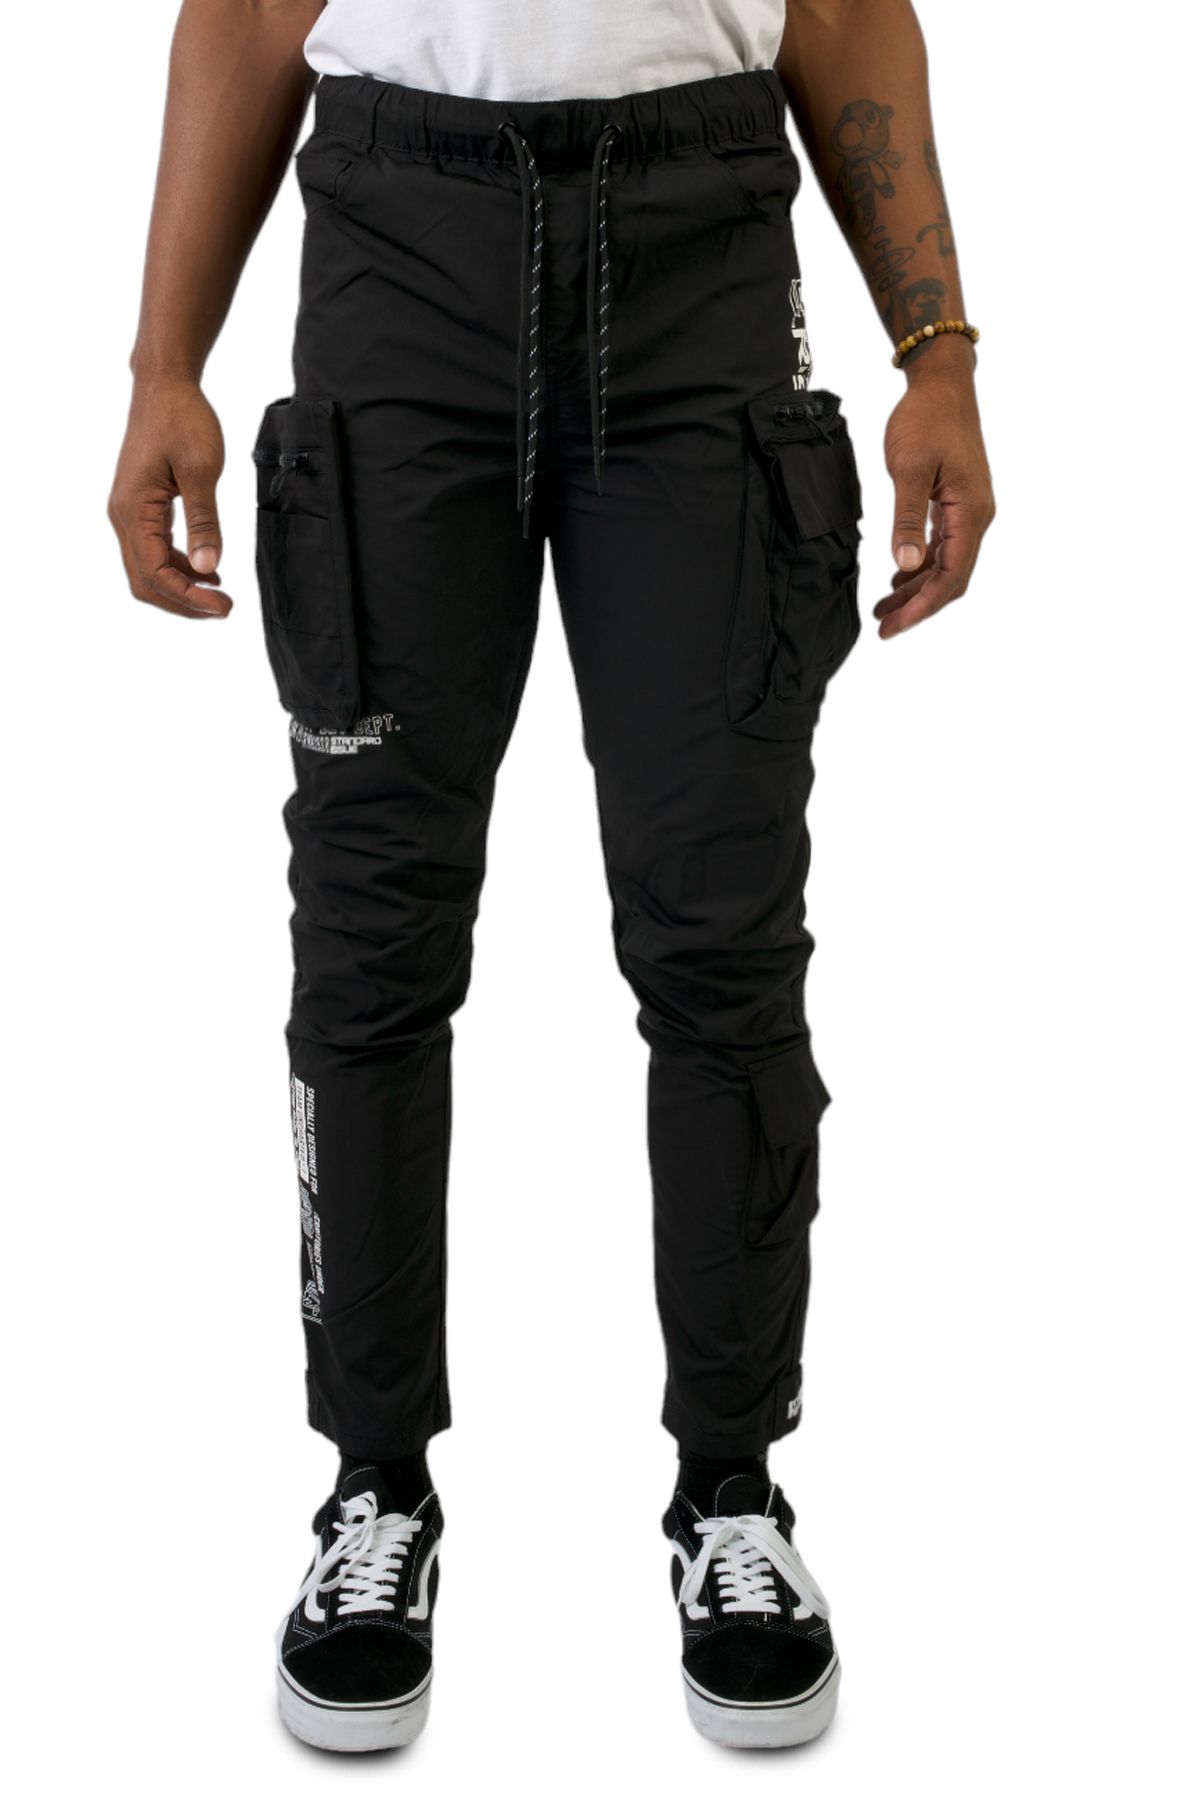 Black Baggy Pants with Chain